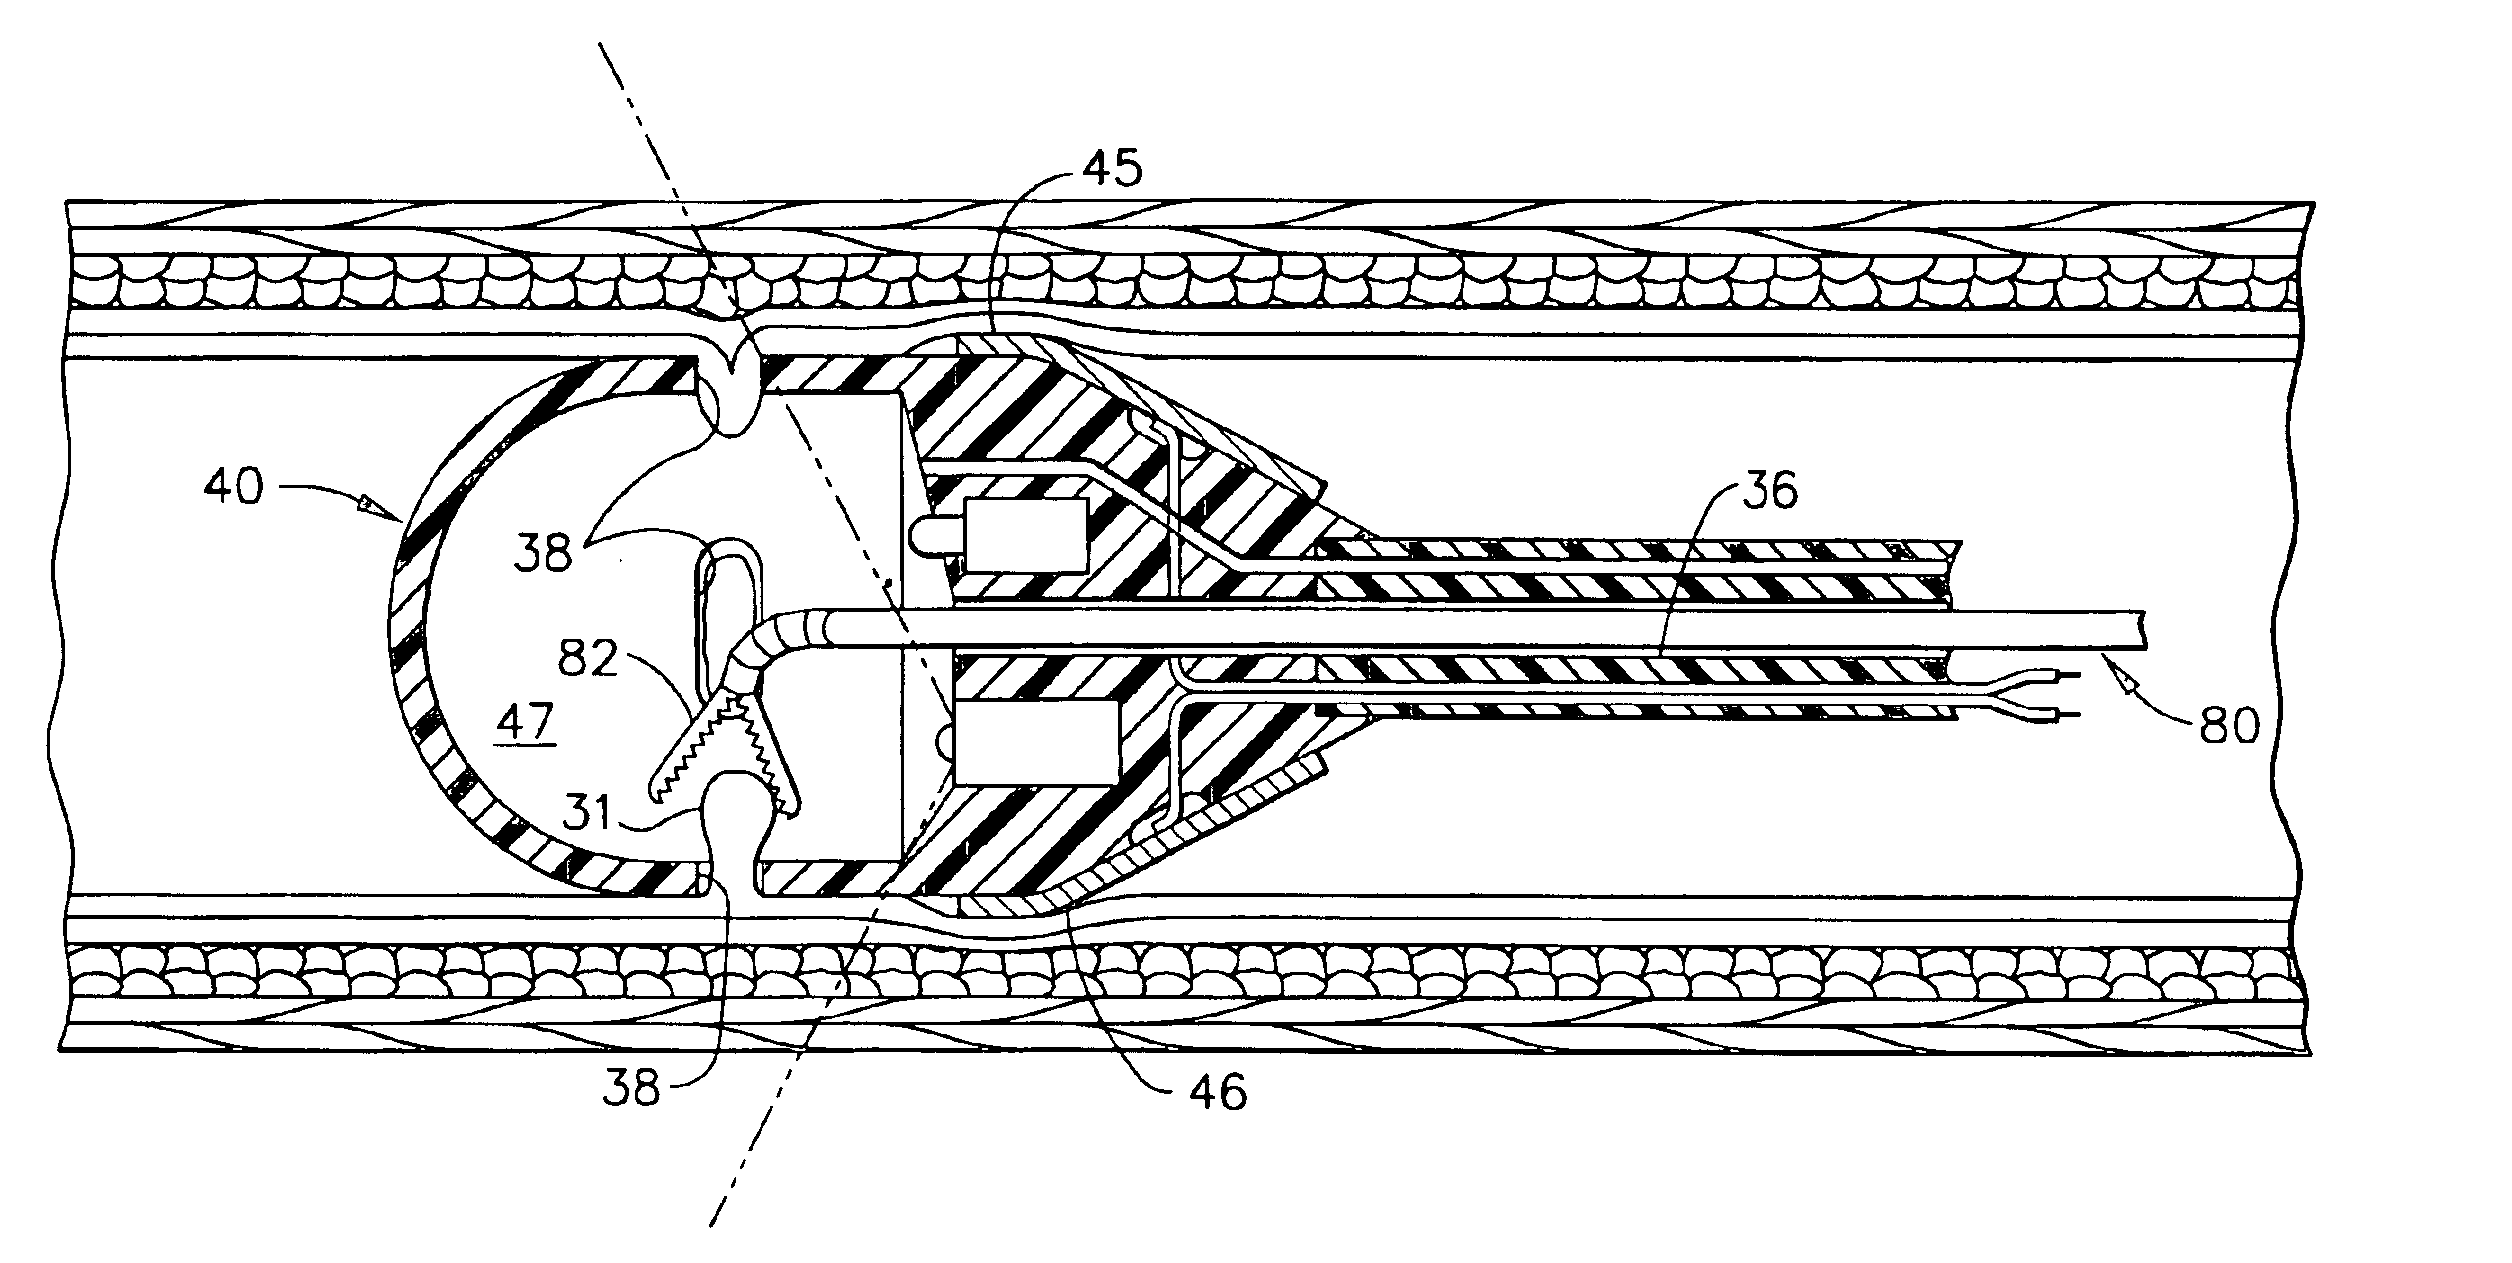 Self-propelled, intraluminal device with working channel and method of use